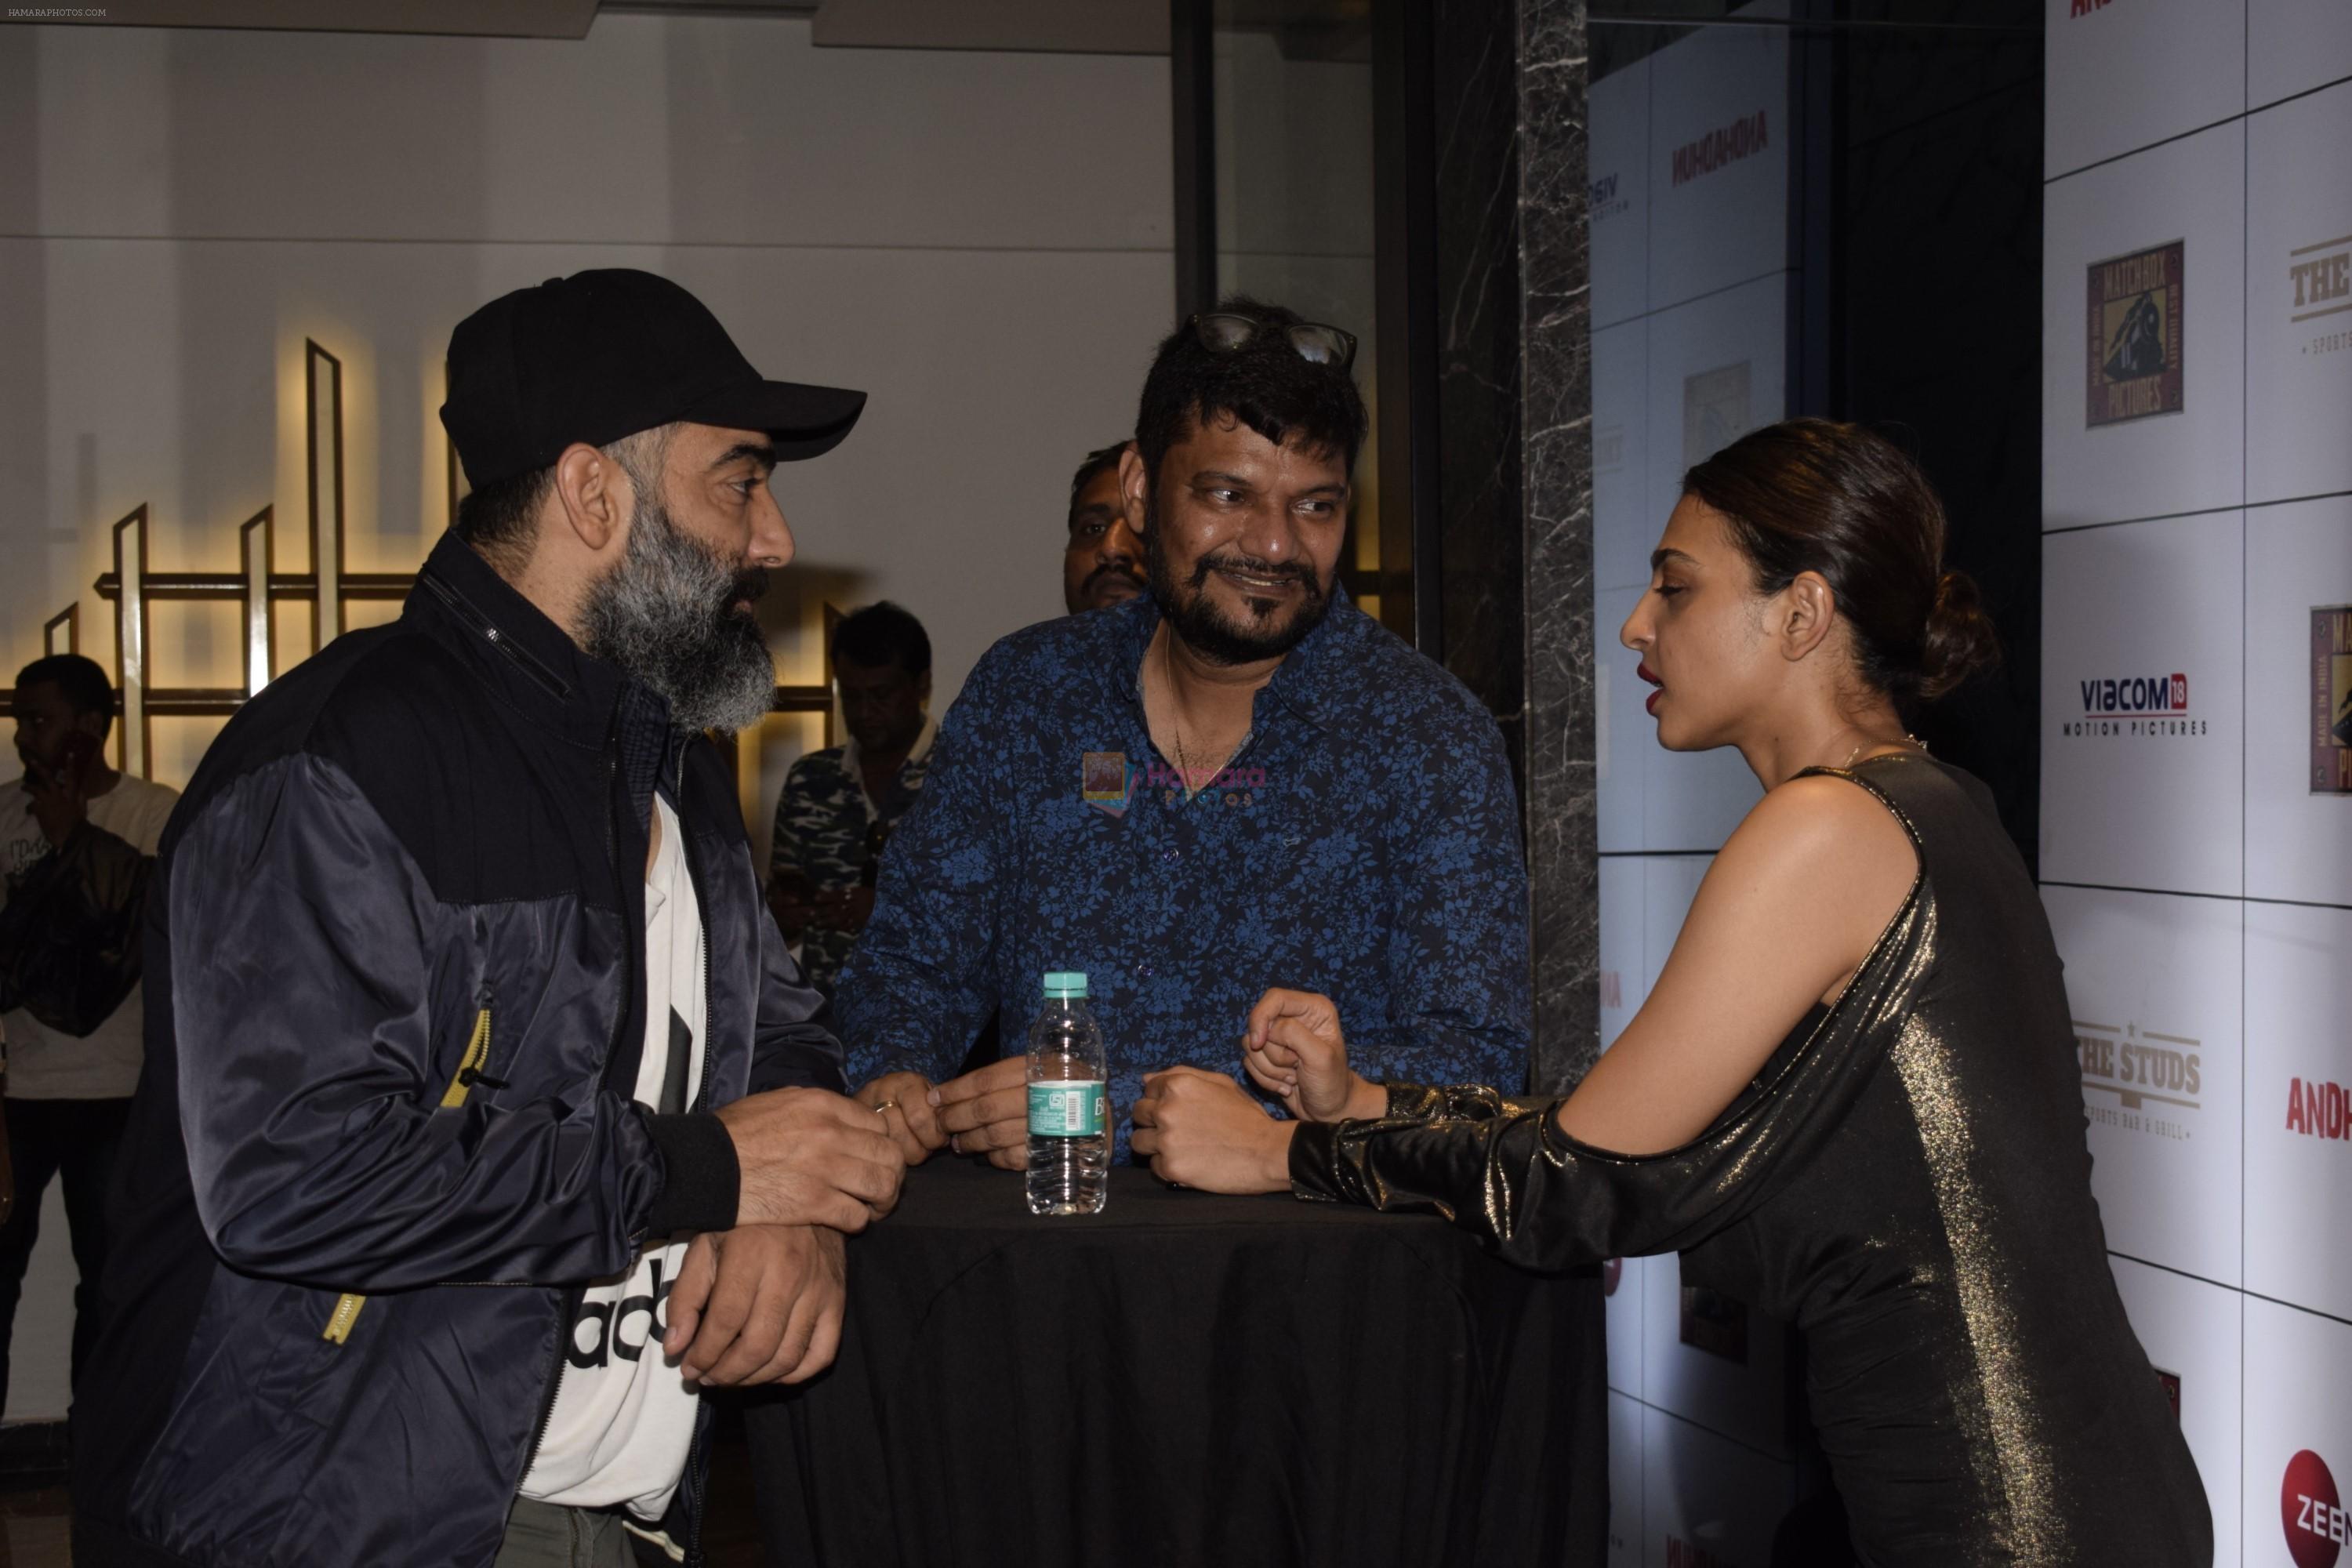 Radhika Apte at the Success Party of Film Andhadhun on 16th Oct 2018